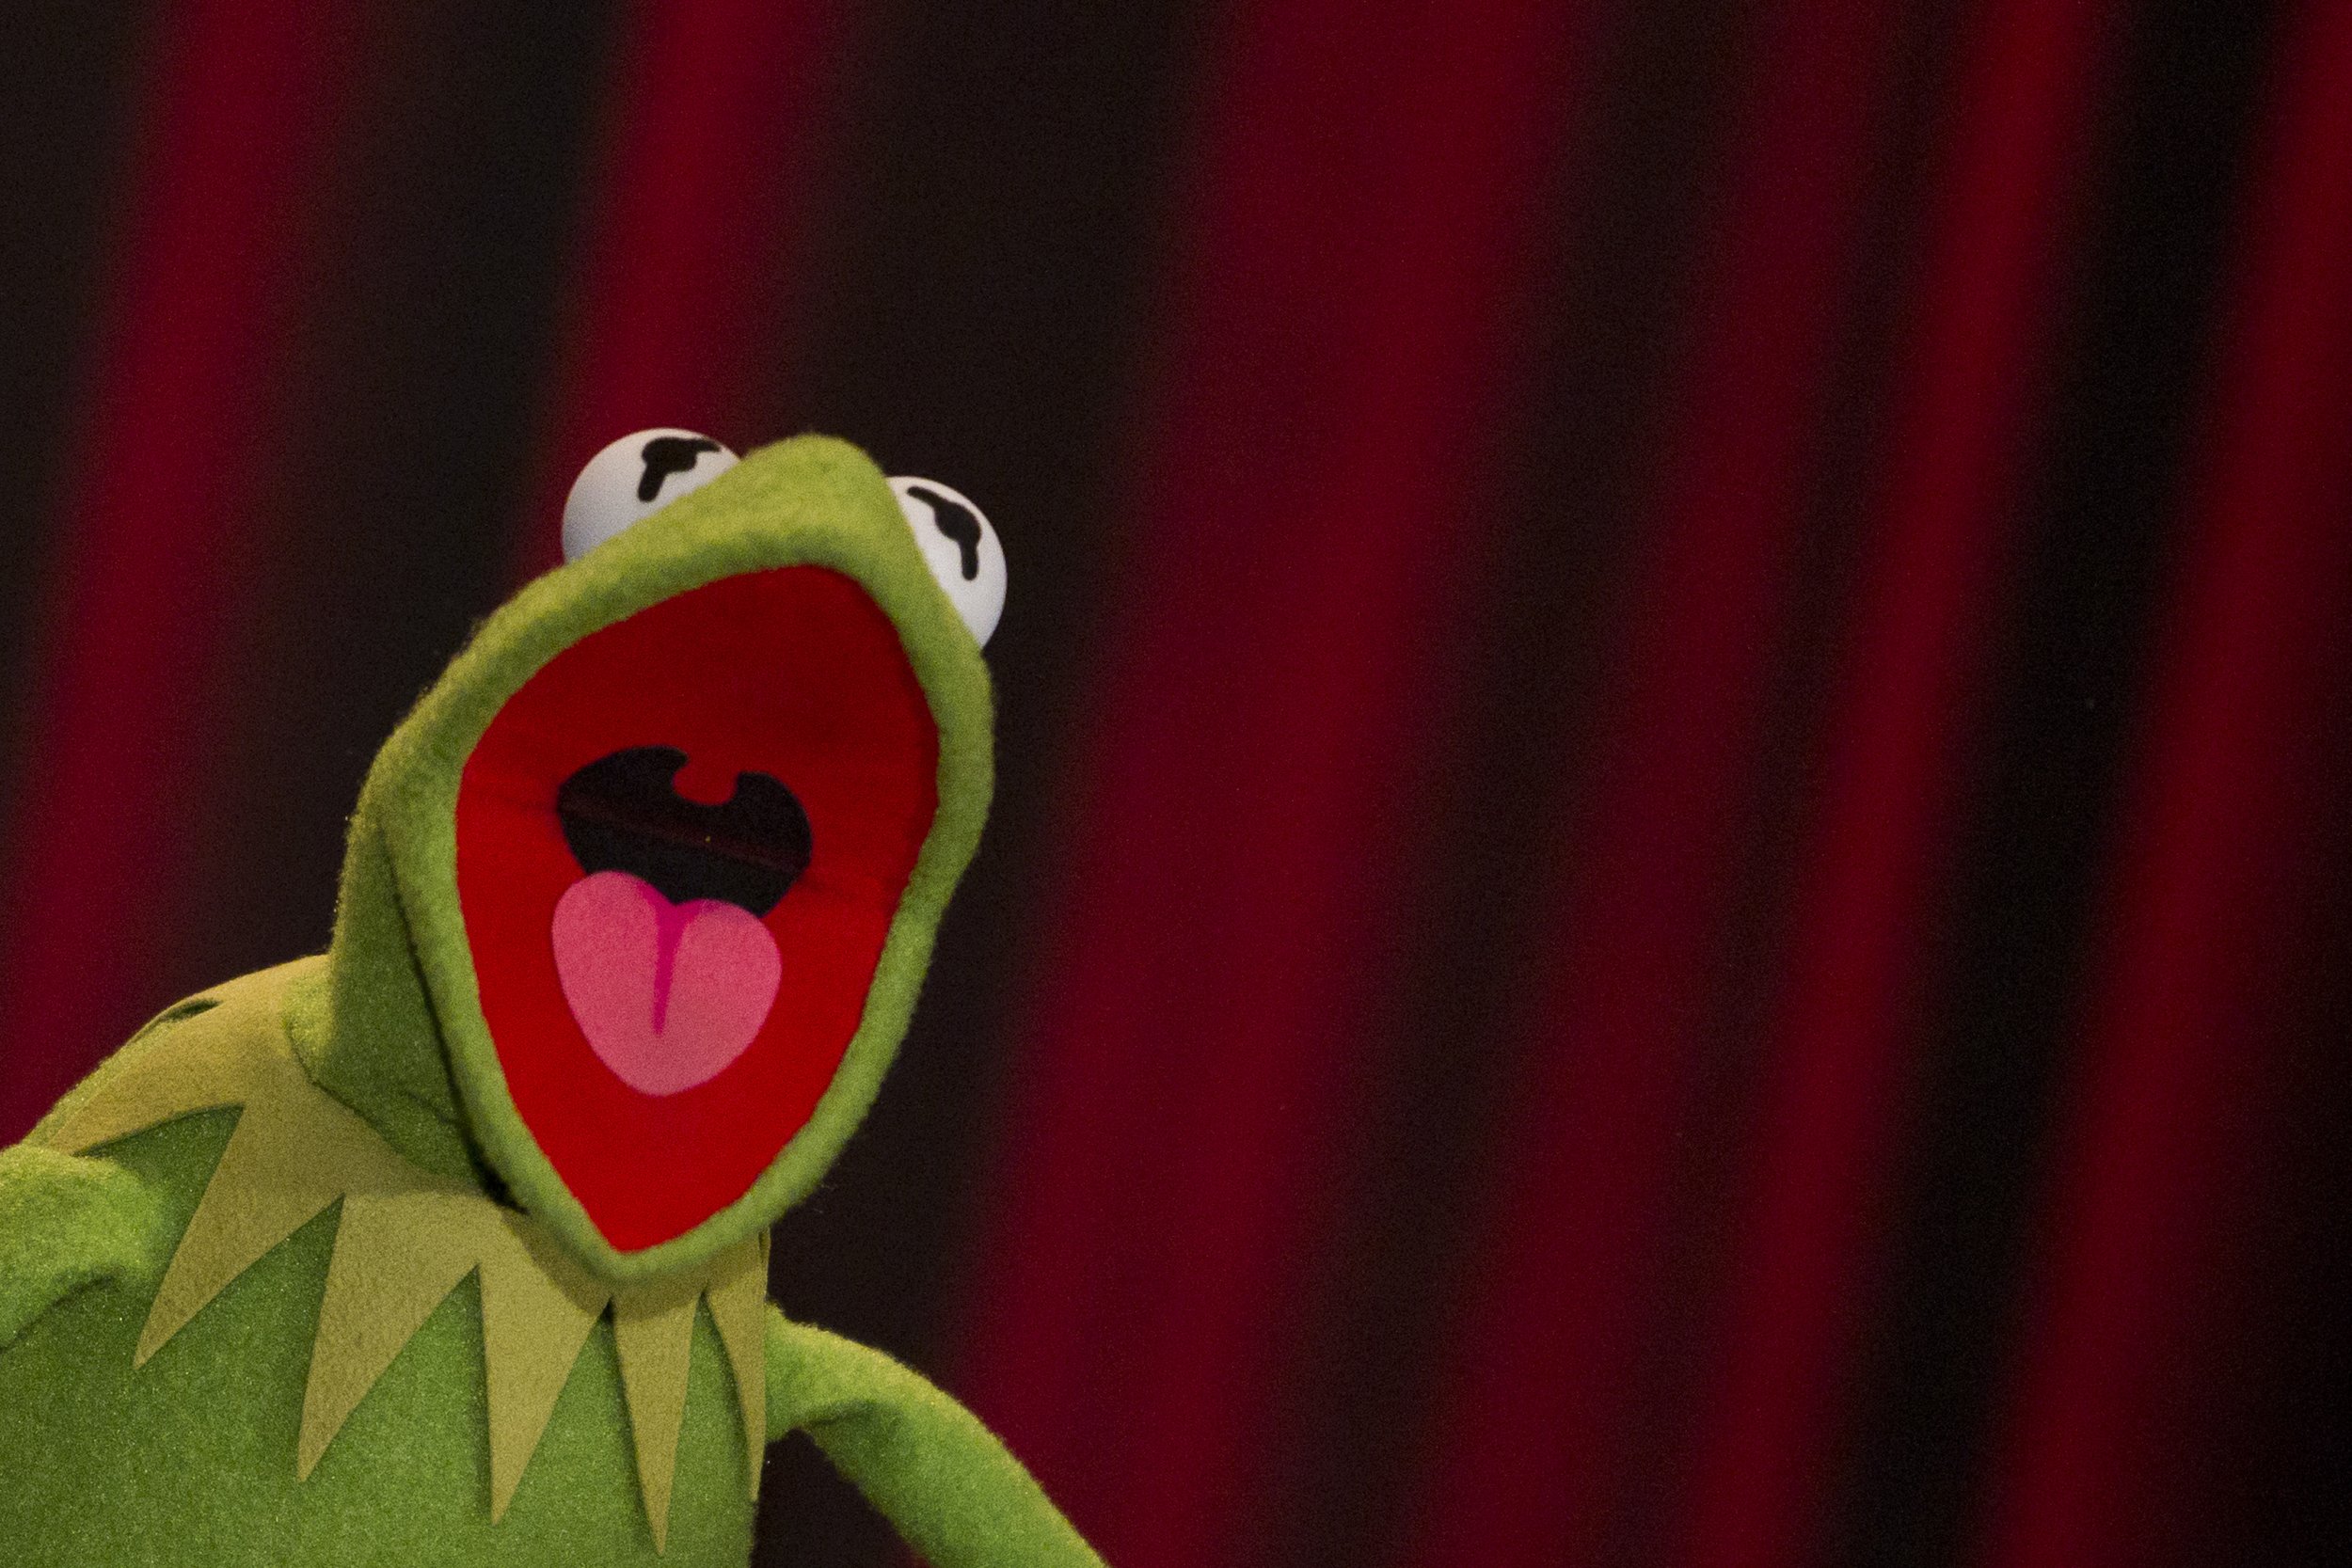 The velvet frog describes the "The Muppets," as being about "...